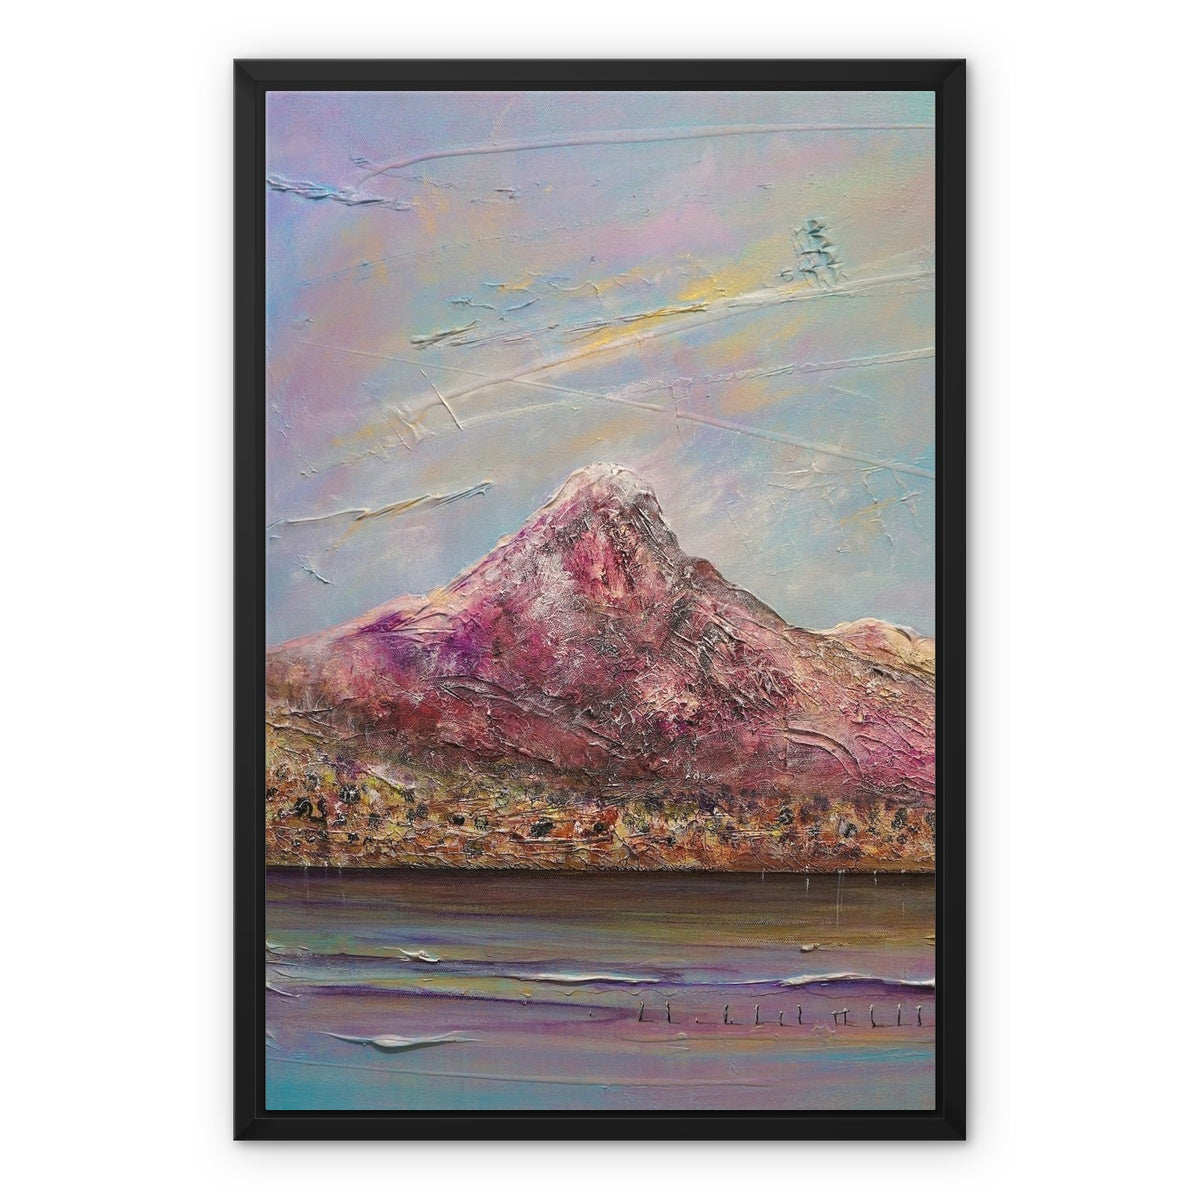 Ben Lomond Painting | Framed Canvas From Scotland-Floating Framed Canvas Prints-Scottish Lochs & Mountains Art Gallery-18"x24"-Black Frame-Paintings, Prints, Homeware, Art Gifts From Scotland By Scottish Artist Kevin Hunter